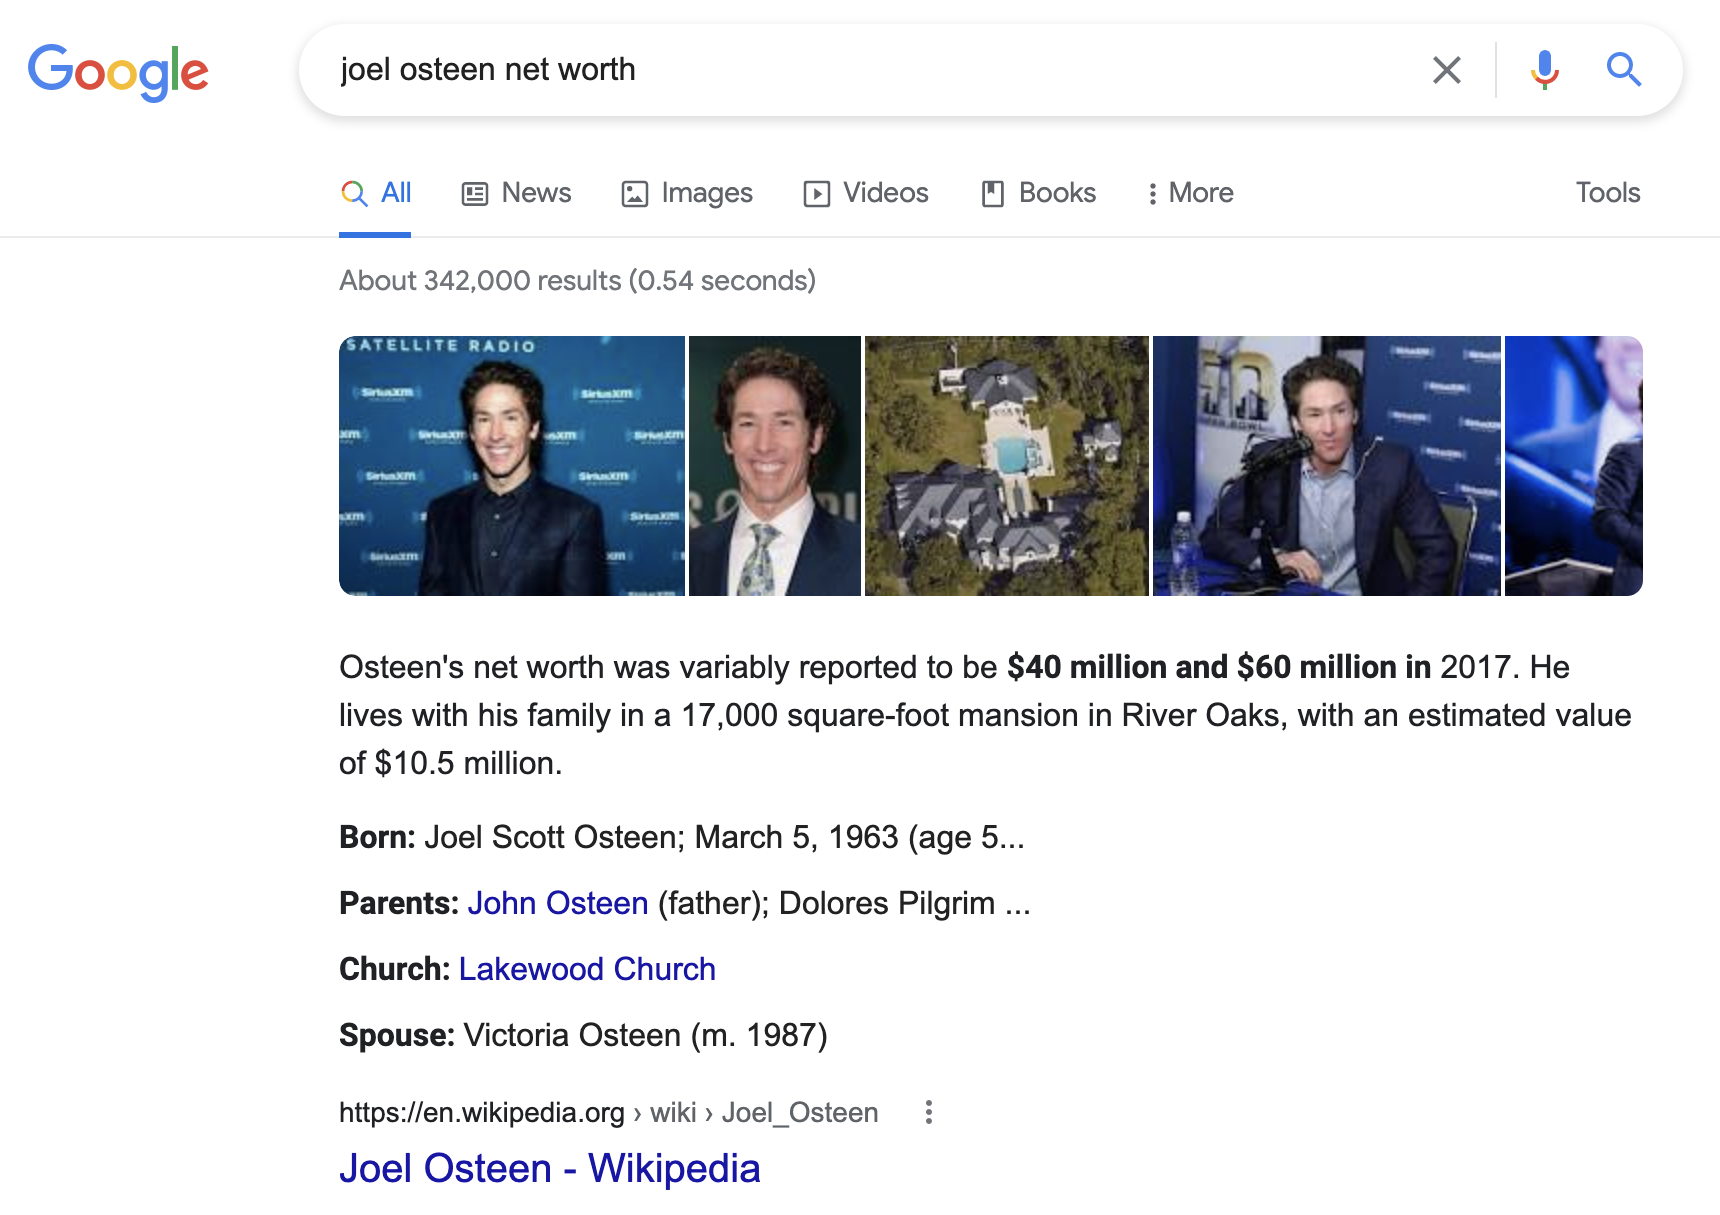 Joel Osteen's net worth was estimated to be $ 40 million or $ 60 million or $ 100 million.